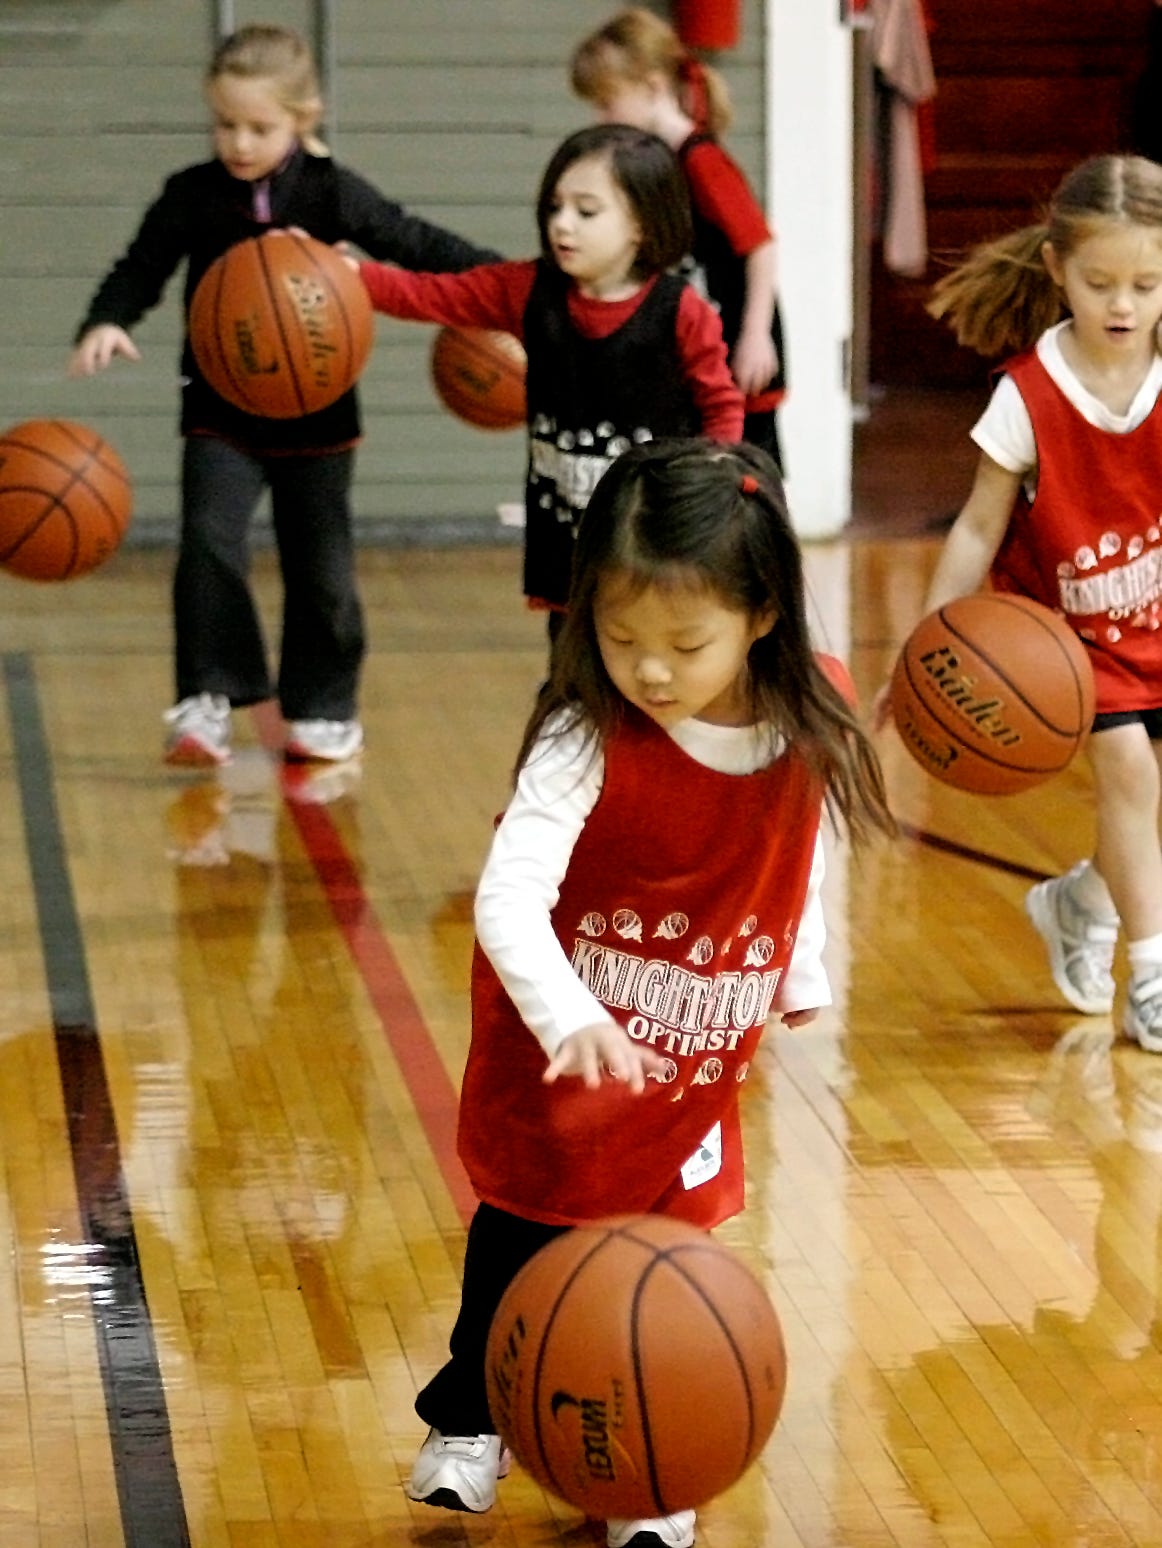 Little kids learning the fundamentals of basketball just seems so right in a place like the Hoosier Gym. Here, Optimist Club youngsters practice their dribbling skills. Feelings of Hoosier pride swell up for most people when they enter the gym - even for non-Hoosiers!